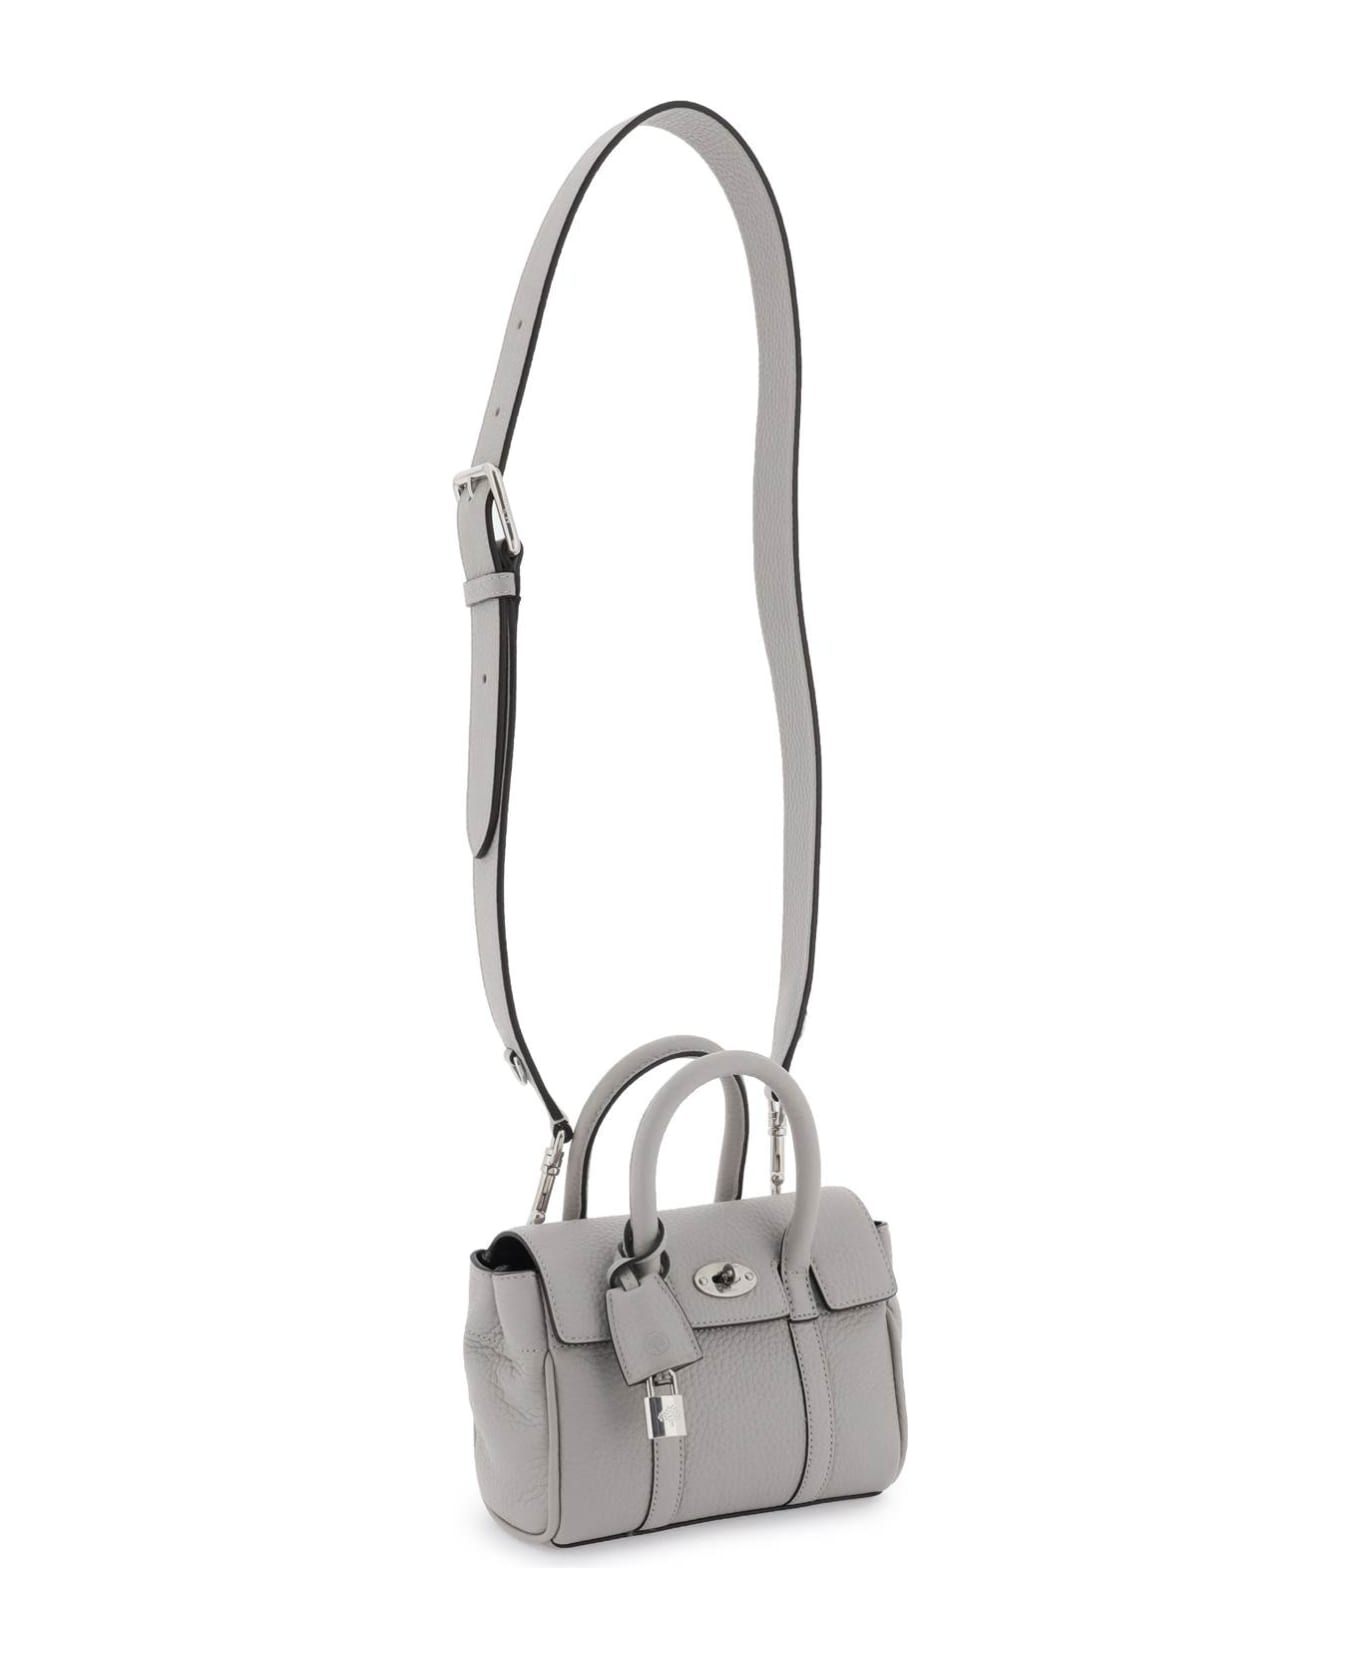 Mulberry Bayswater Mini Bag - PALE GREY (Grey) トートバッグ